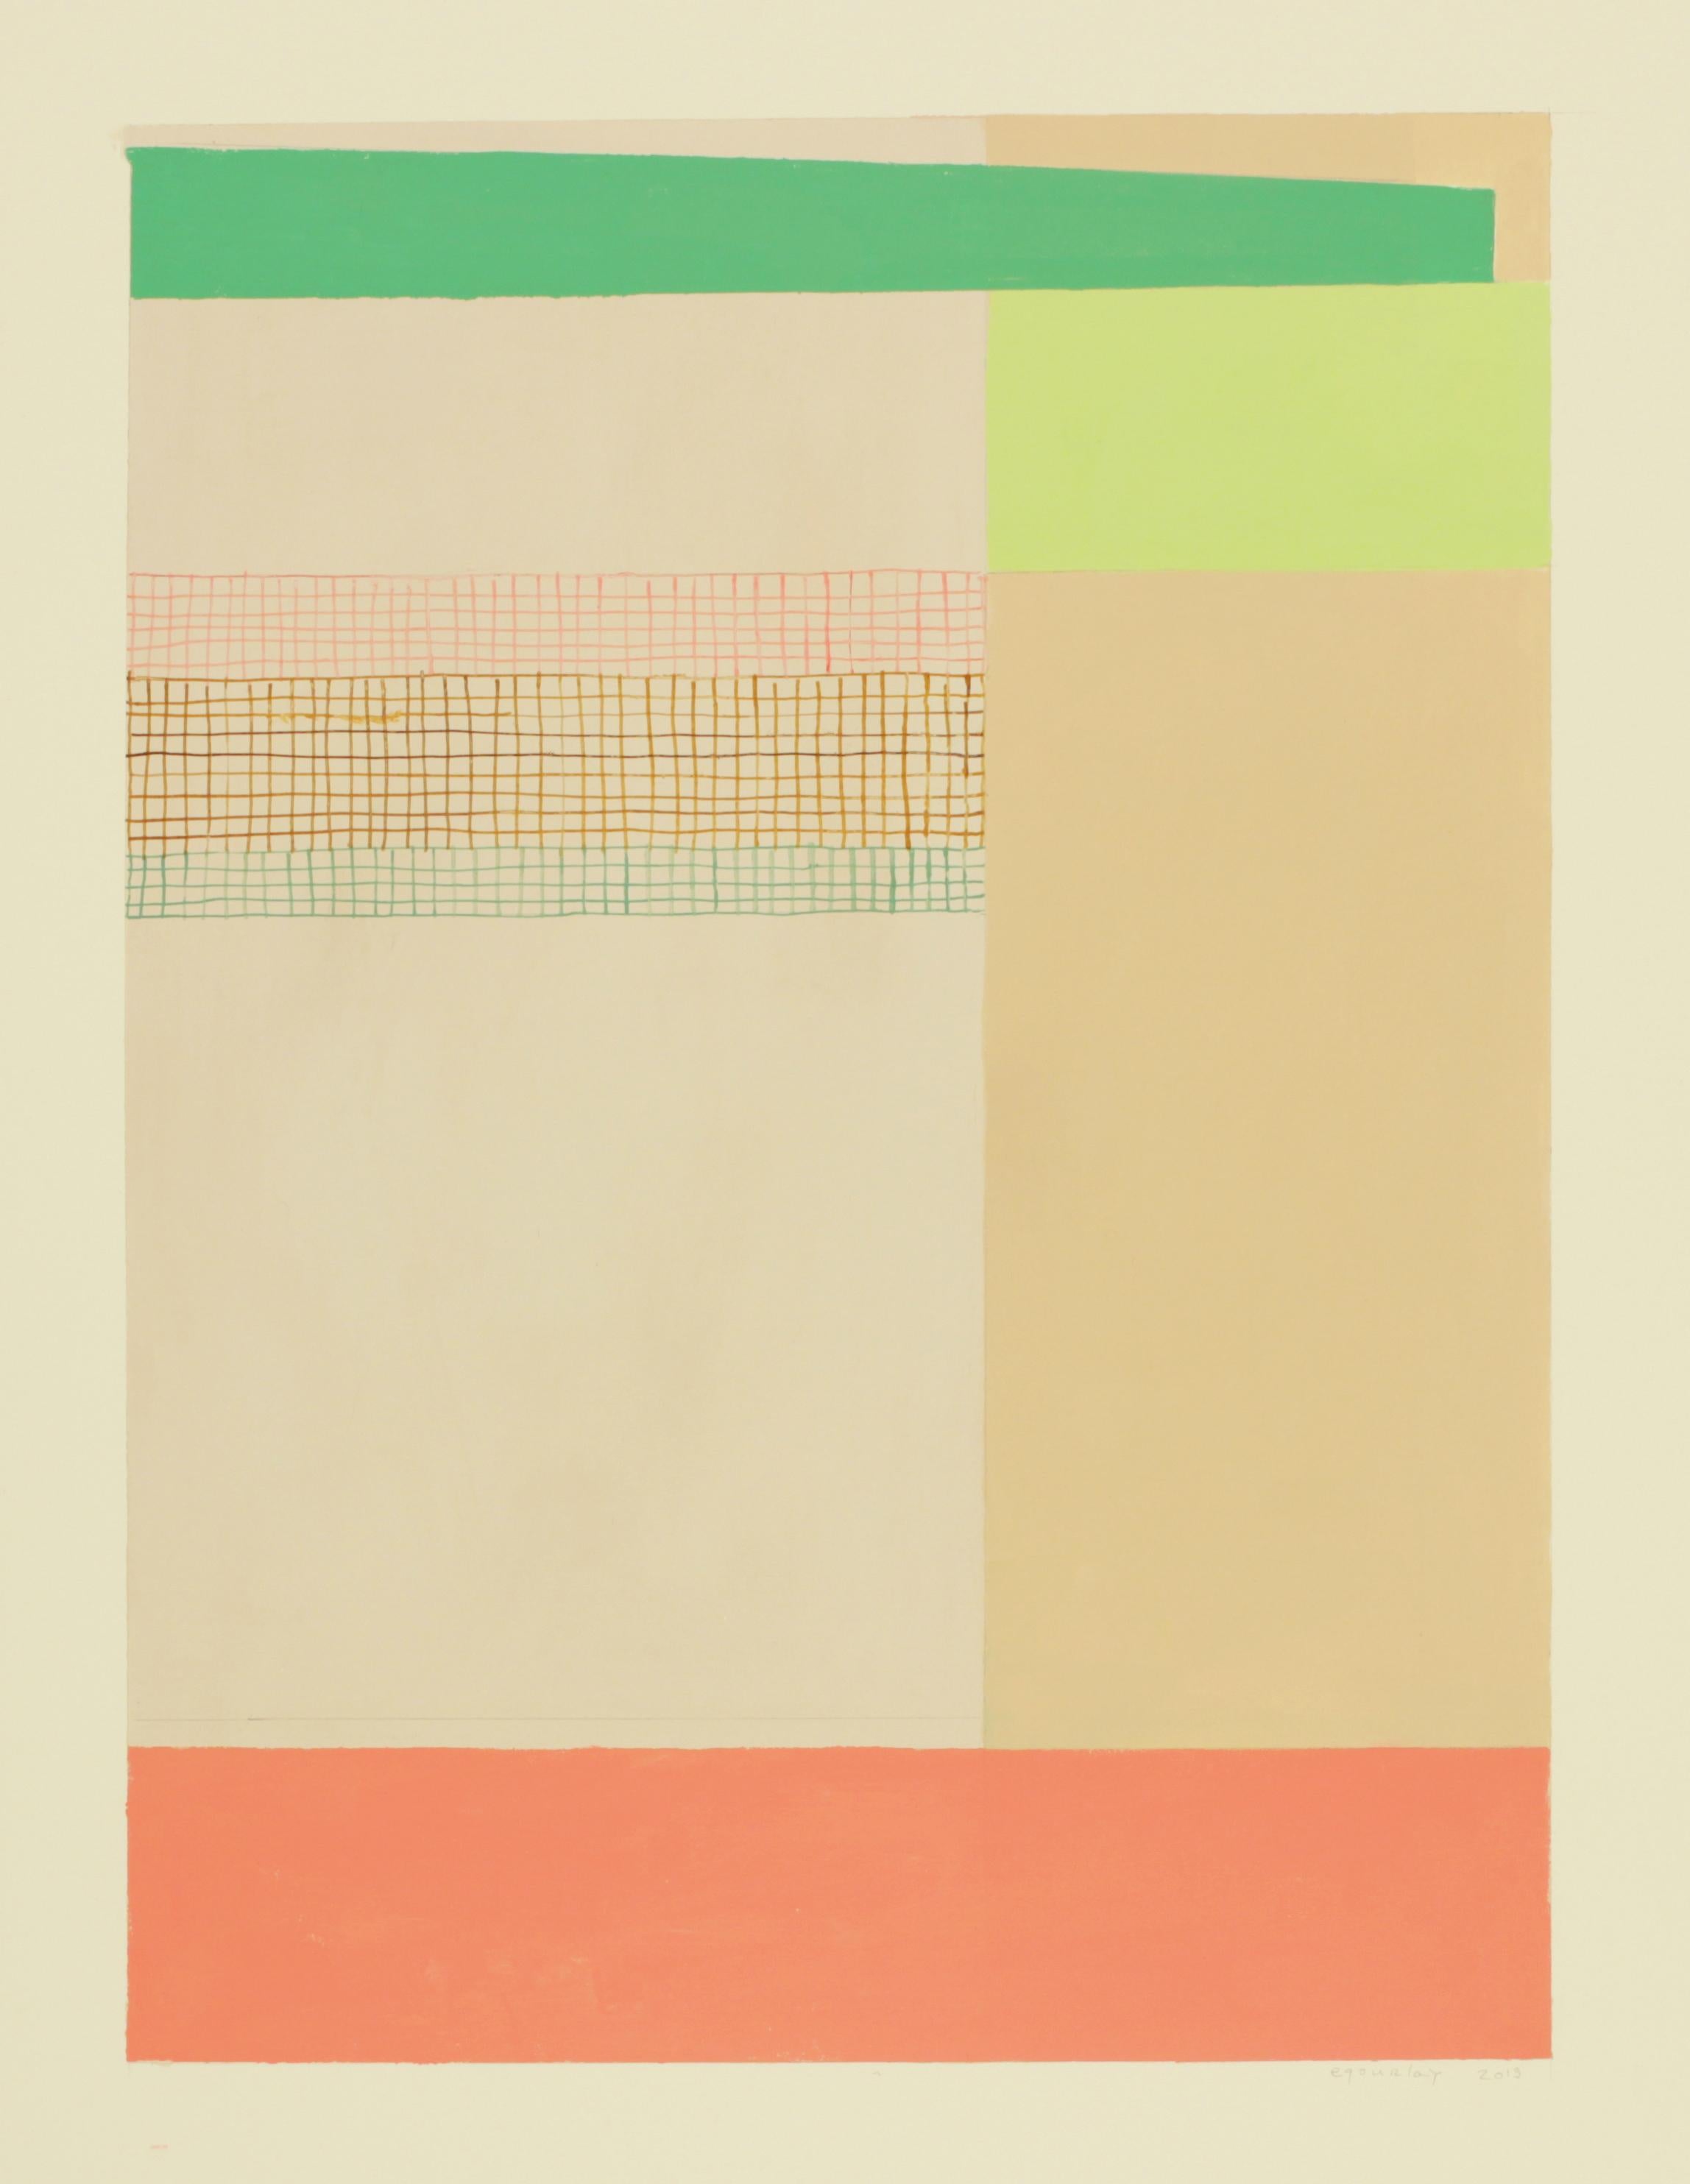 In this abstract painting in gouache and ink on paper by Elizabeth Gourlay, clean and precise, carefully ordered blocks of color in shades of green and a coral shade of orange are bright against the earthy beige background. A section of very thin